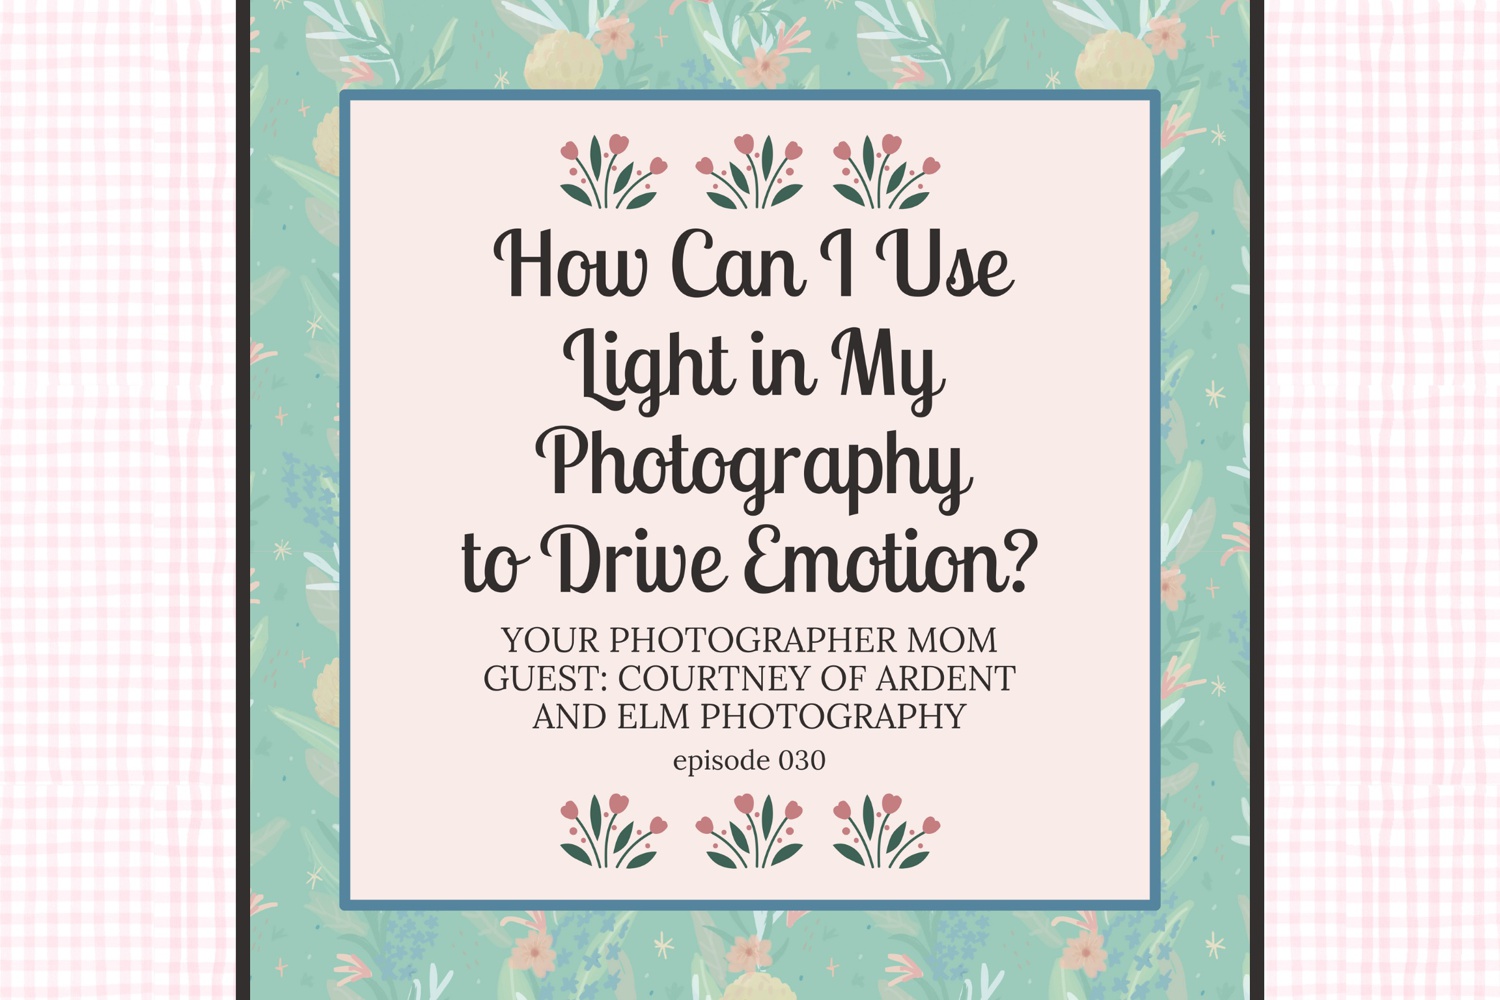 photography podcast for women with guest Courtney of ardent and elm photography